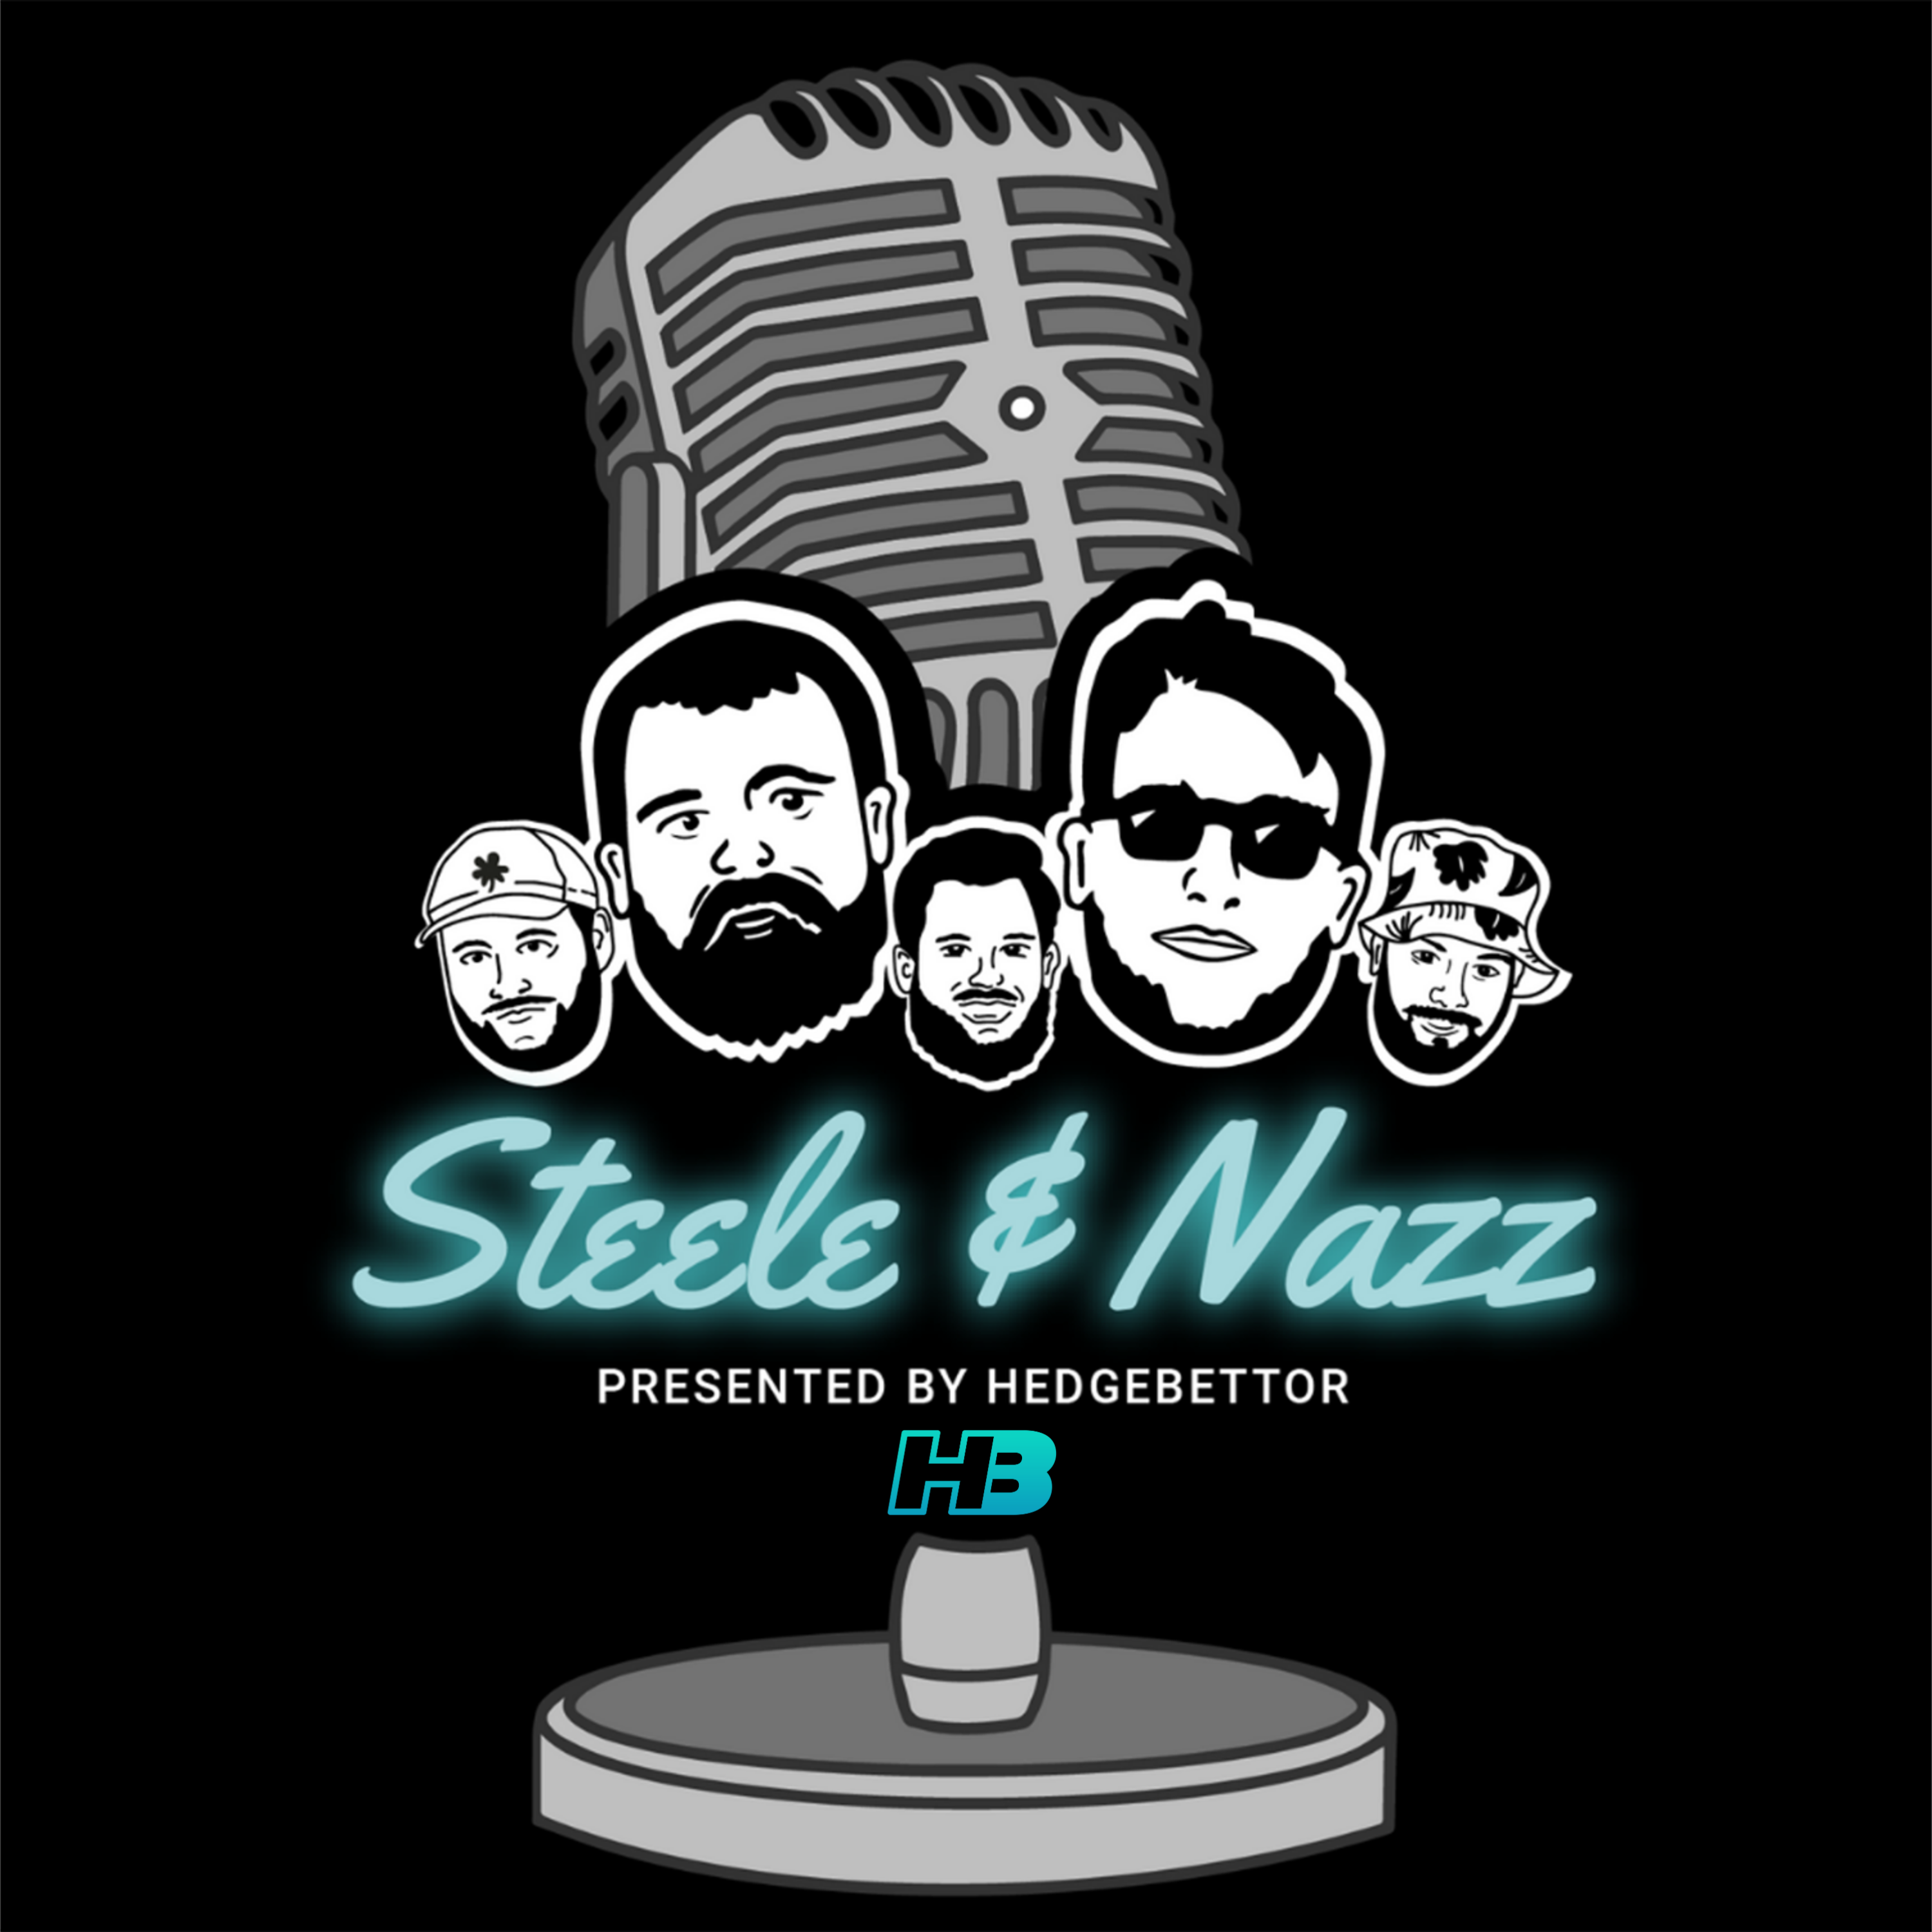 Ep. 151 - 3rd Annual Steele & Nazz Awards